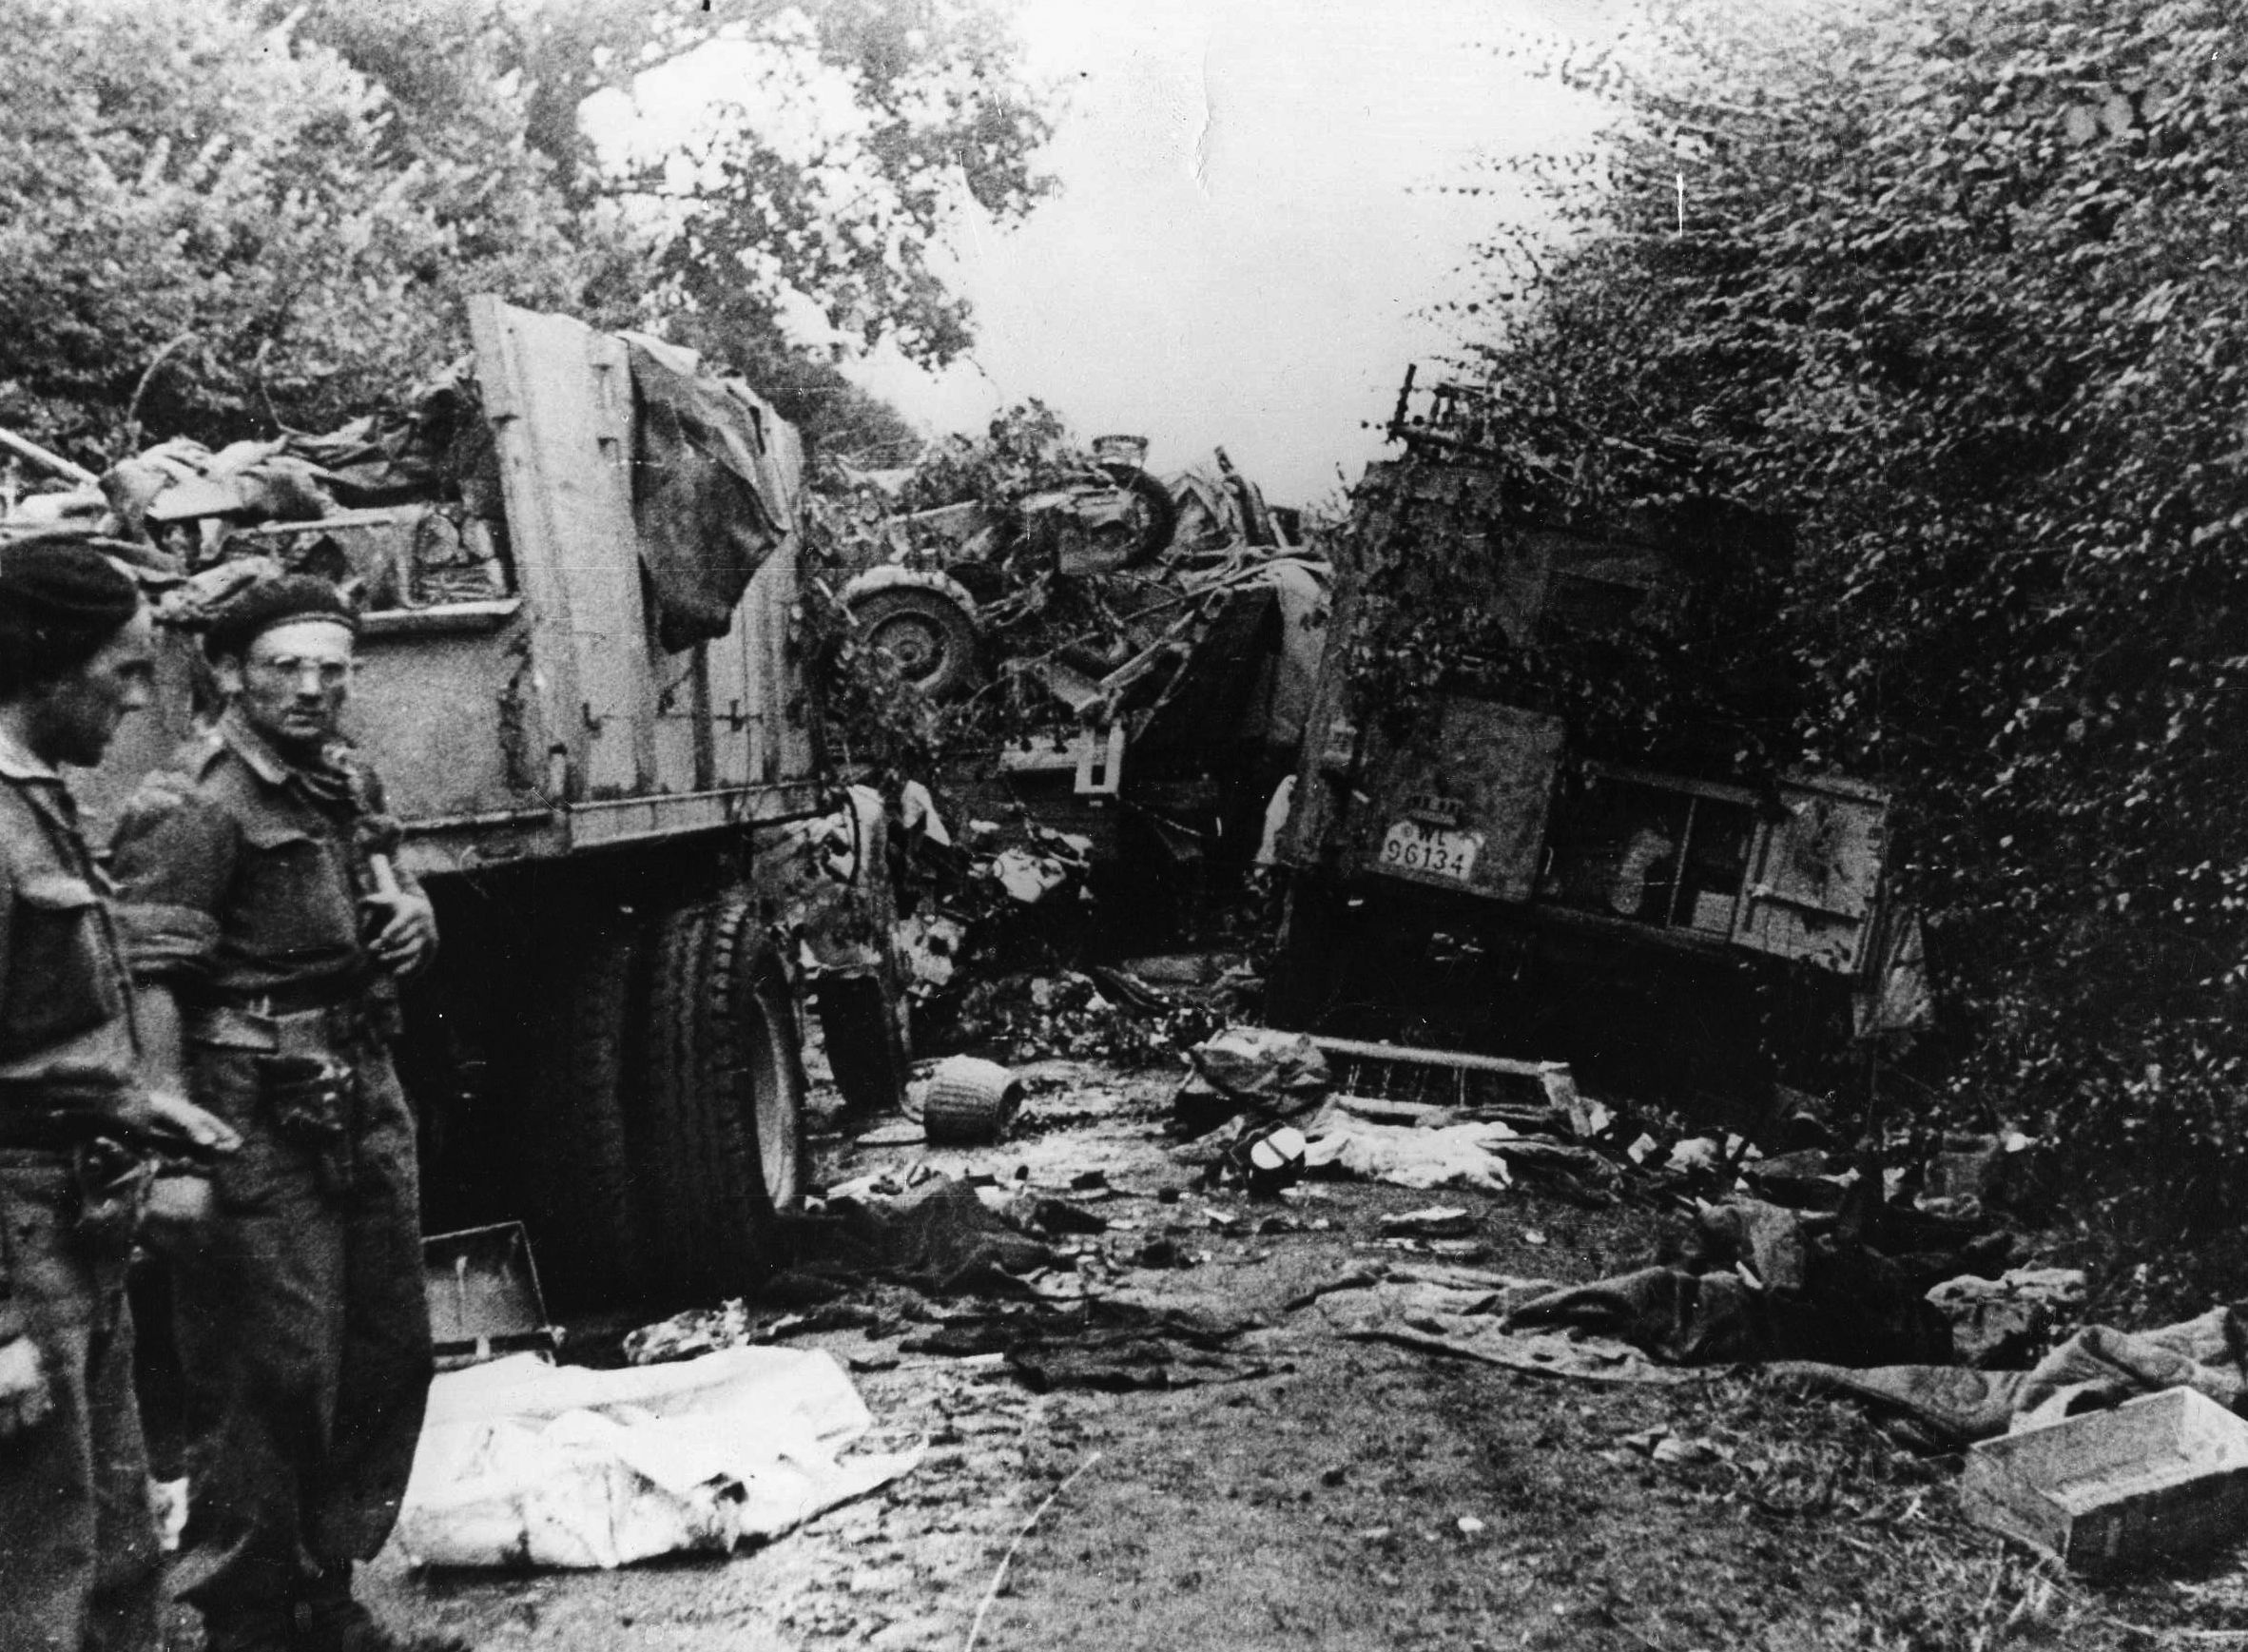 During their frenetic attempt to escape encirclement at Falaise, German columns were ravaged by marauding Allied aircraft, and tons of equipment was abandoned along the roads leading eastward. The bodies of dead men and horses were strewn thickly as well. (National Archives)